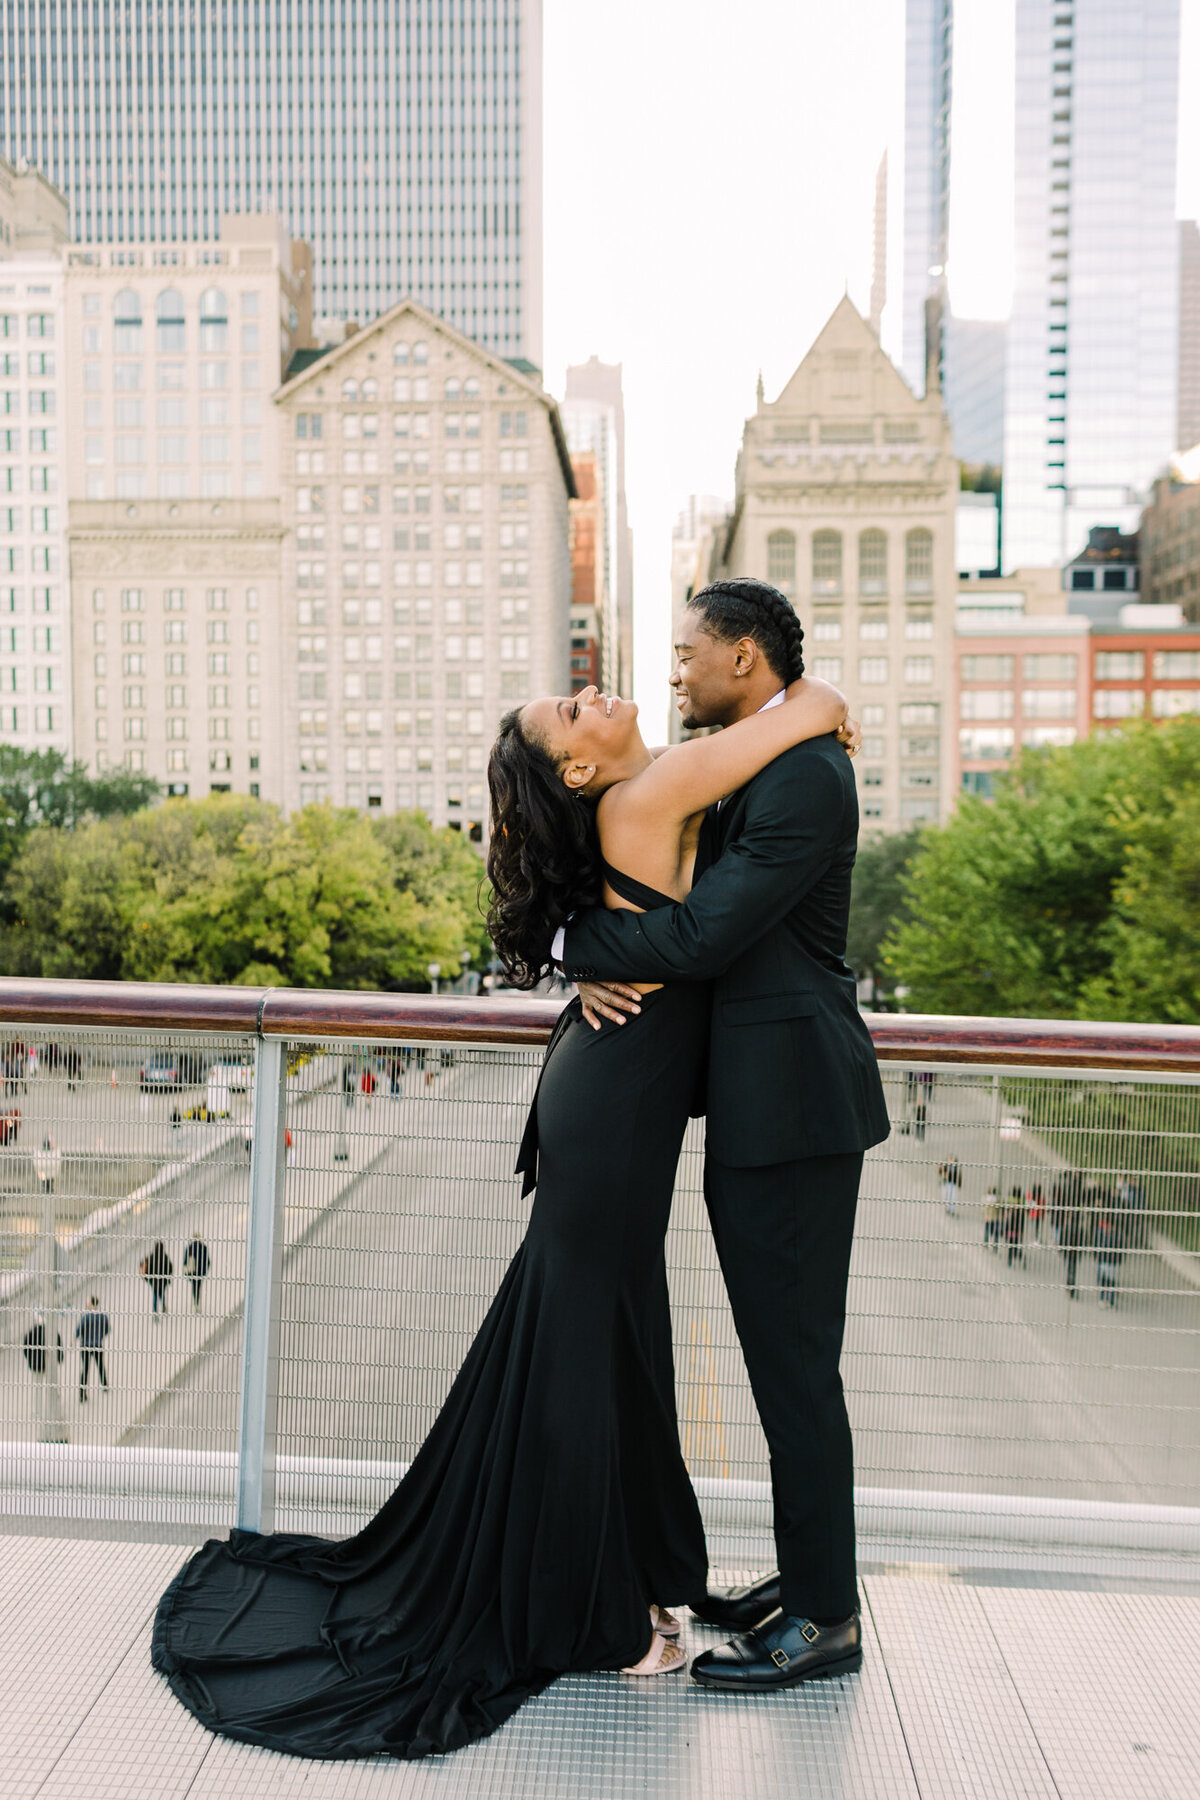 A downtown Chicago engagement session